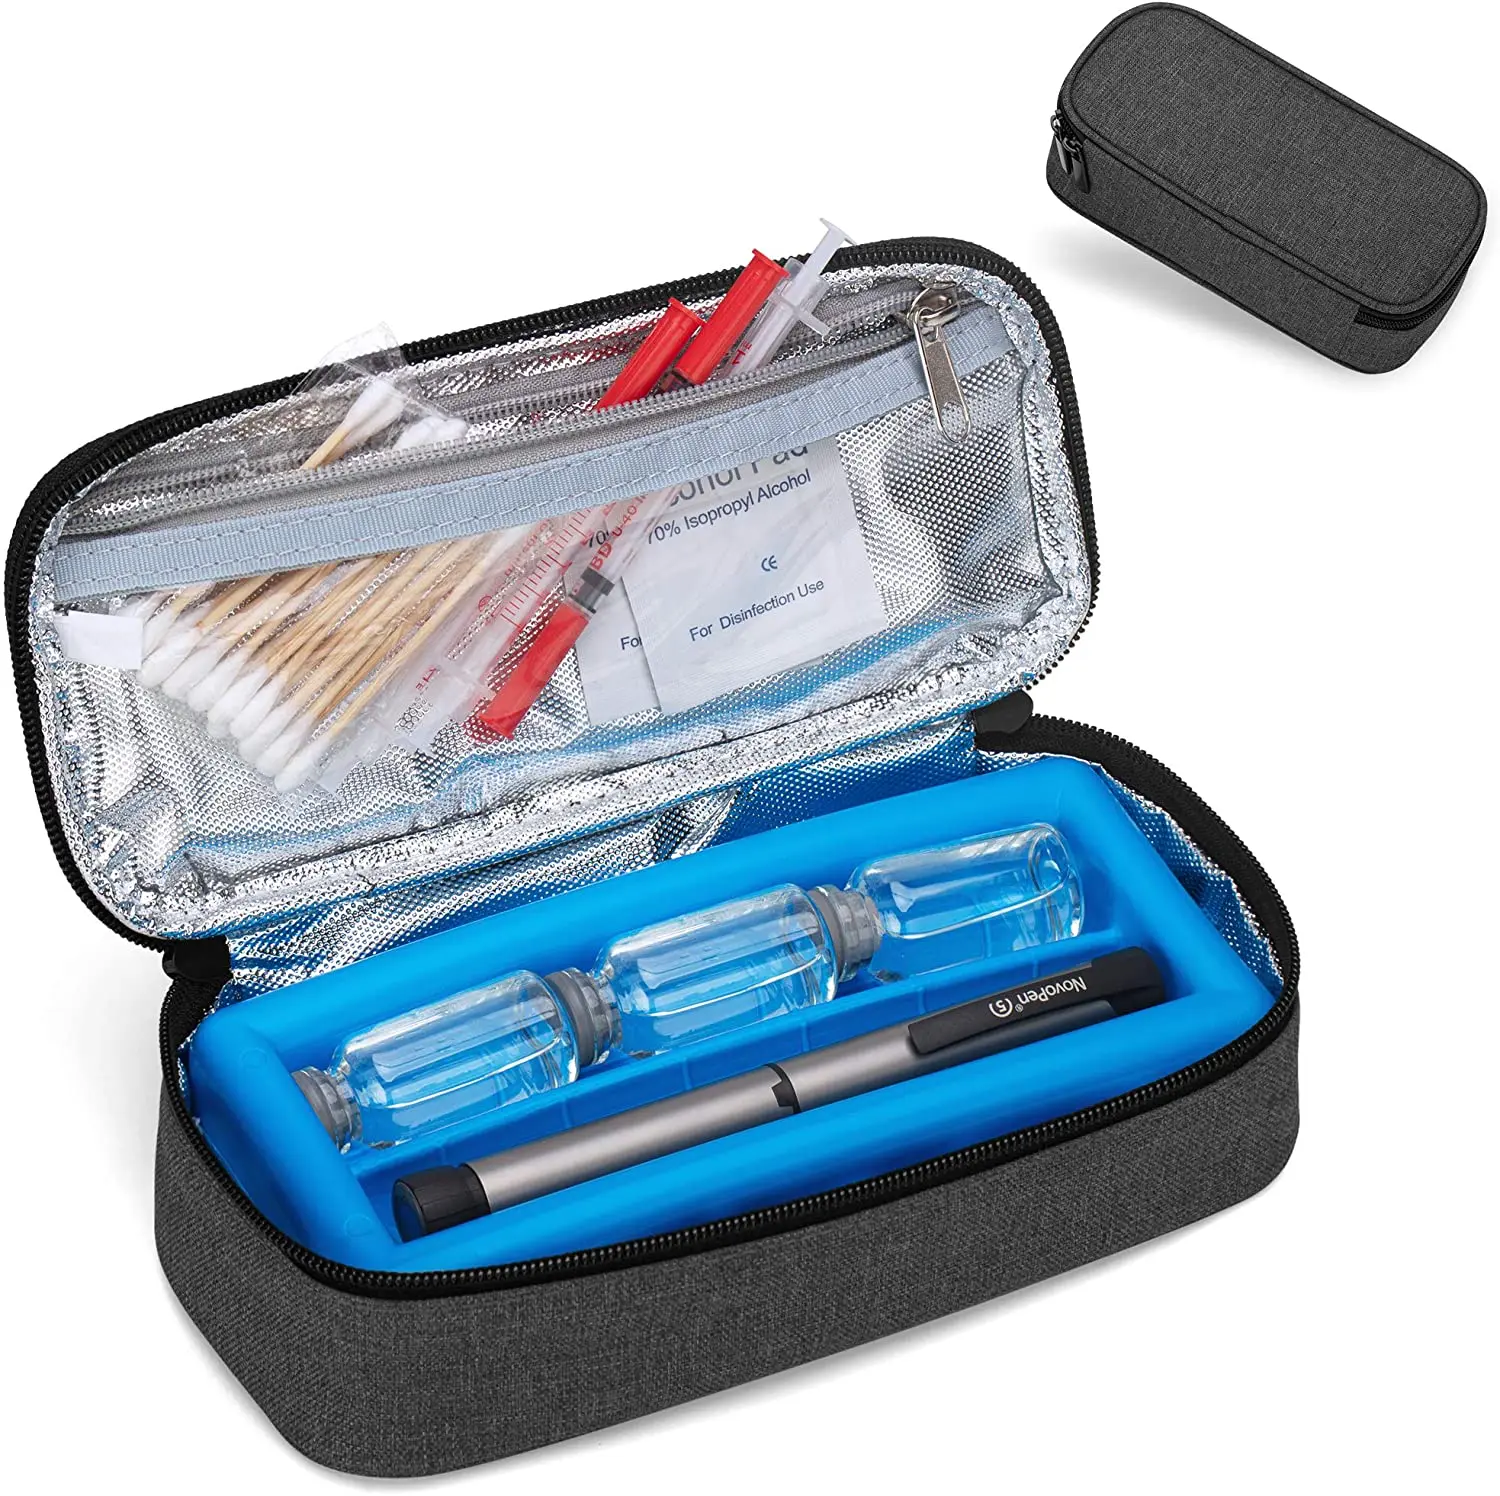 

Travel Diabetic Organizer Insulin Cooling Case with Insulin Vial Protector